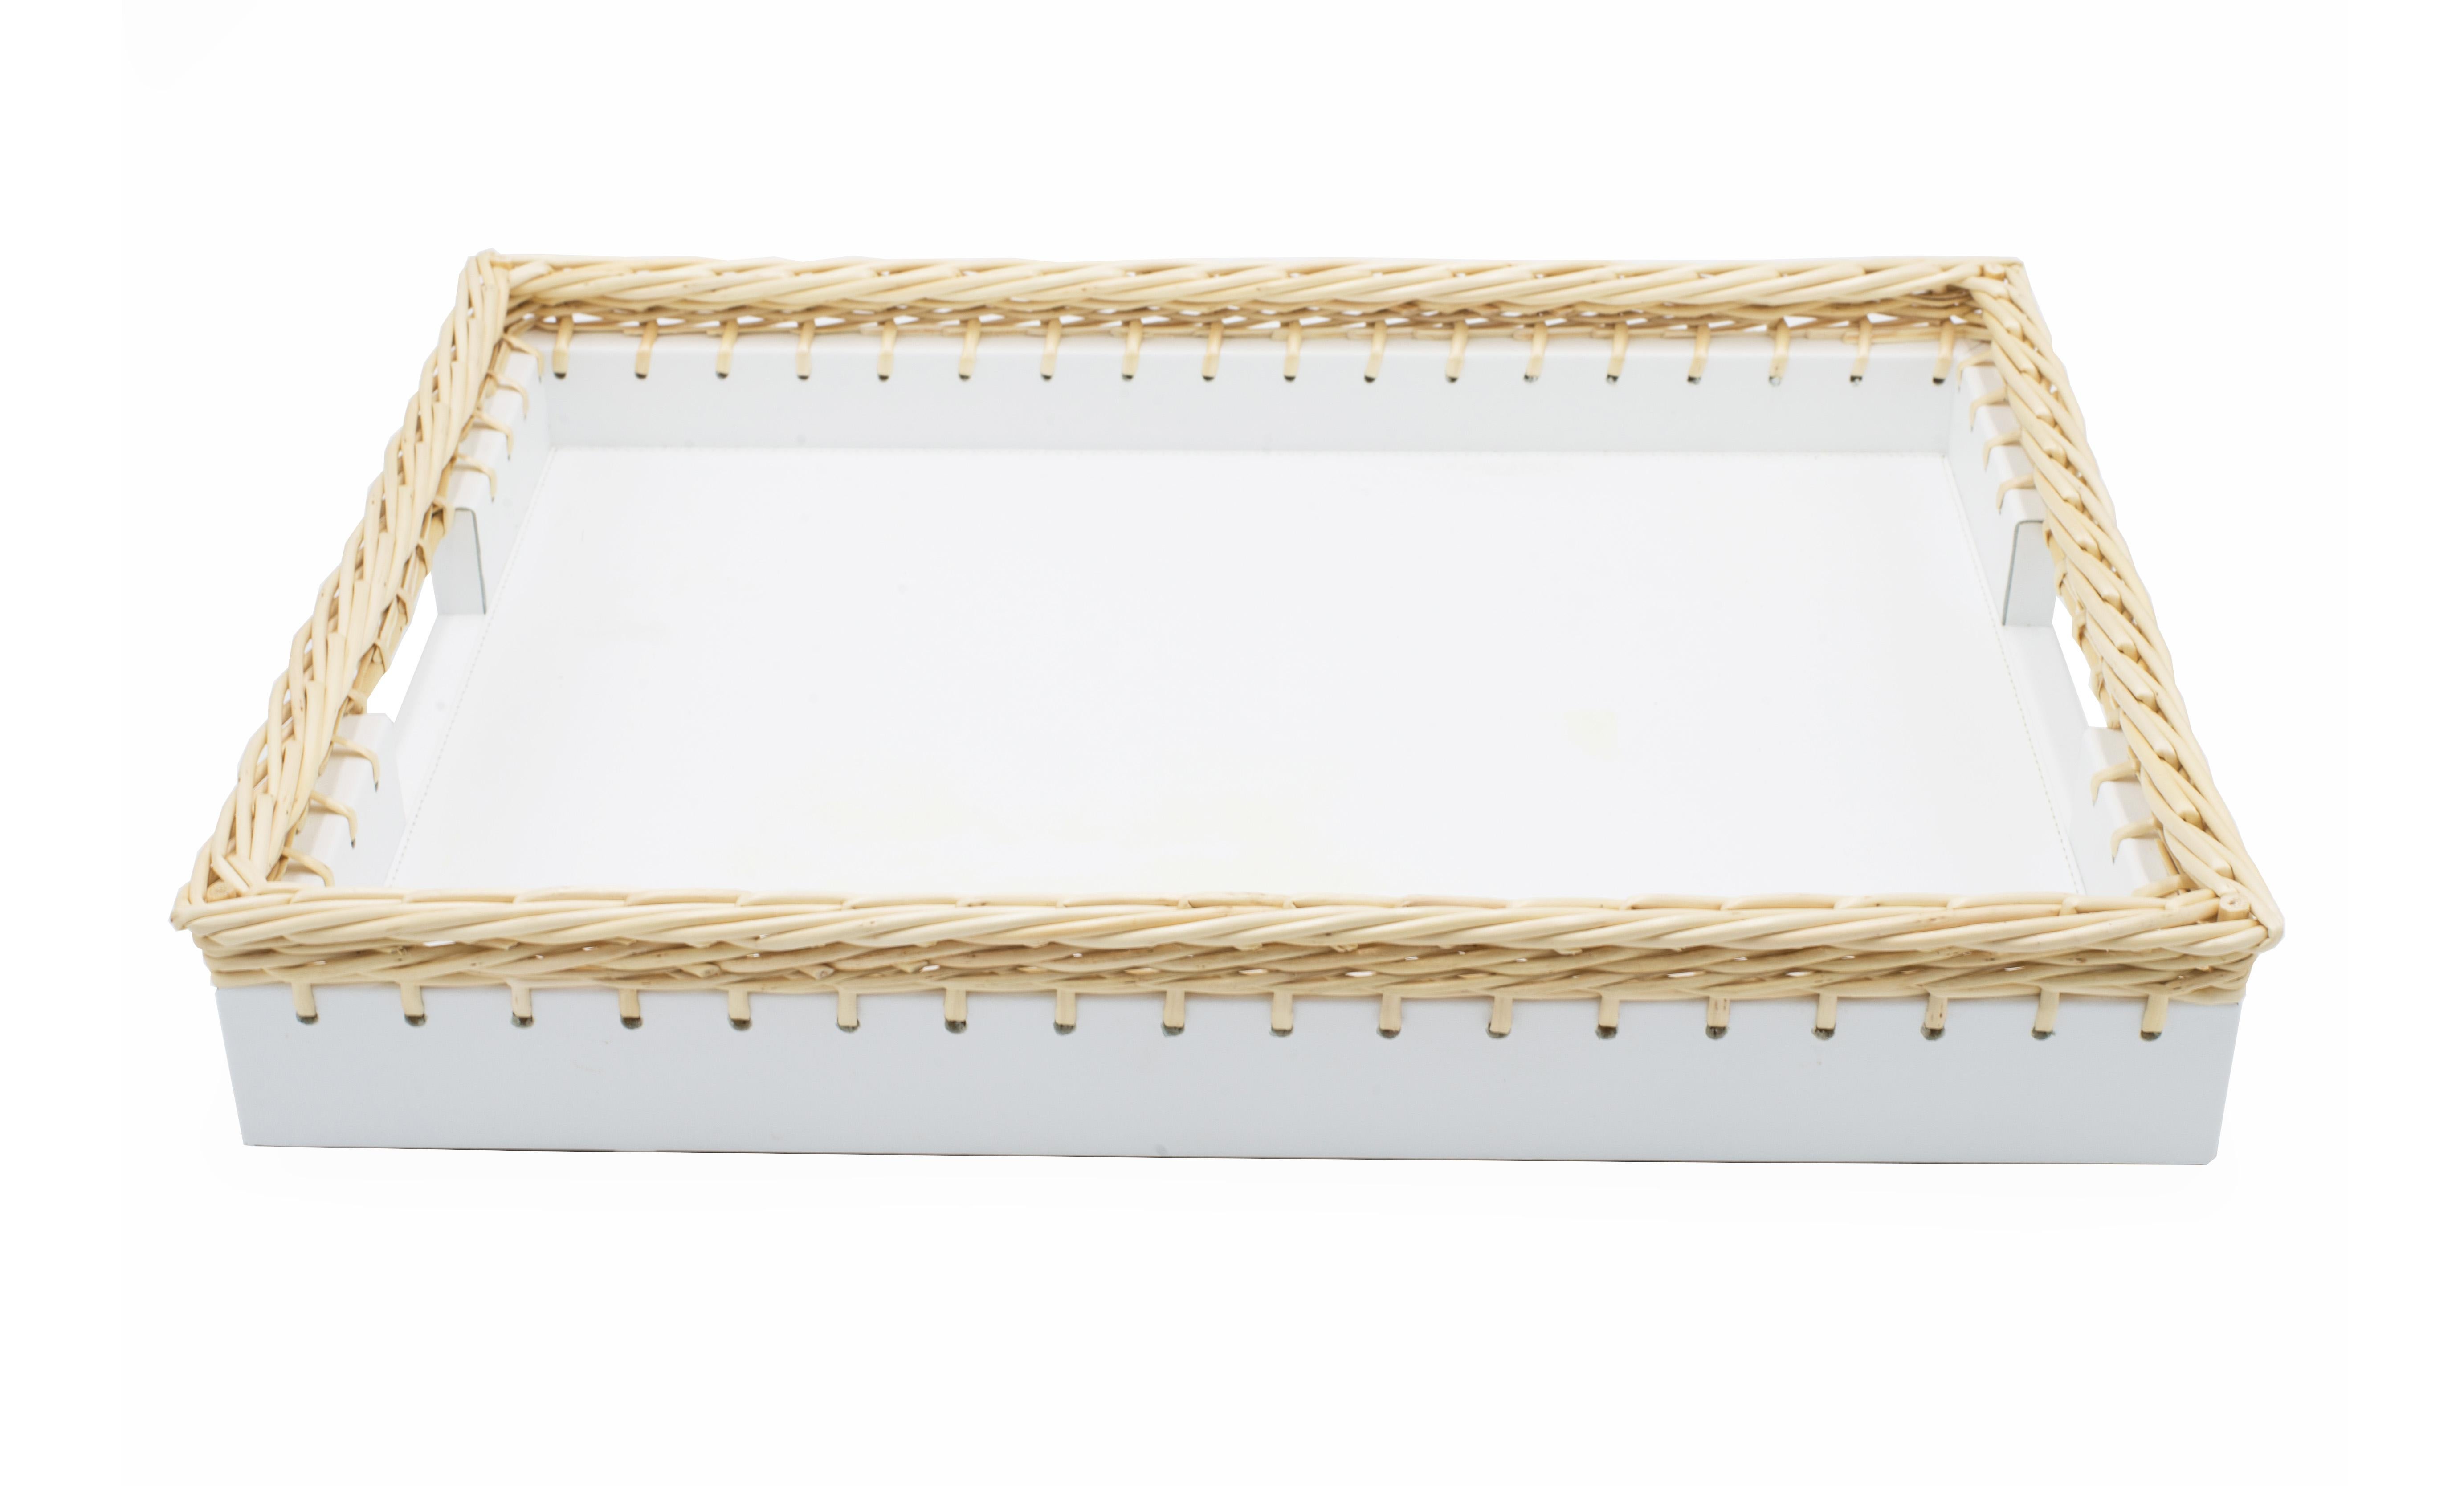 Contemporary rectangular white leather tray with a woven wicker willow wood edge (Made in Italy).